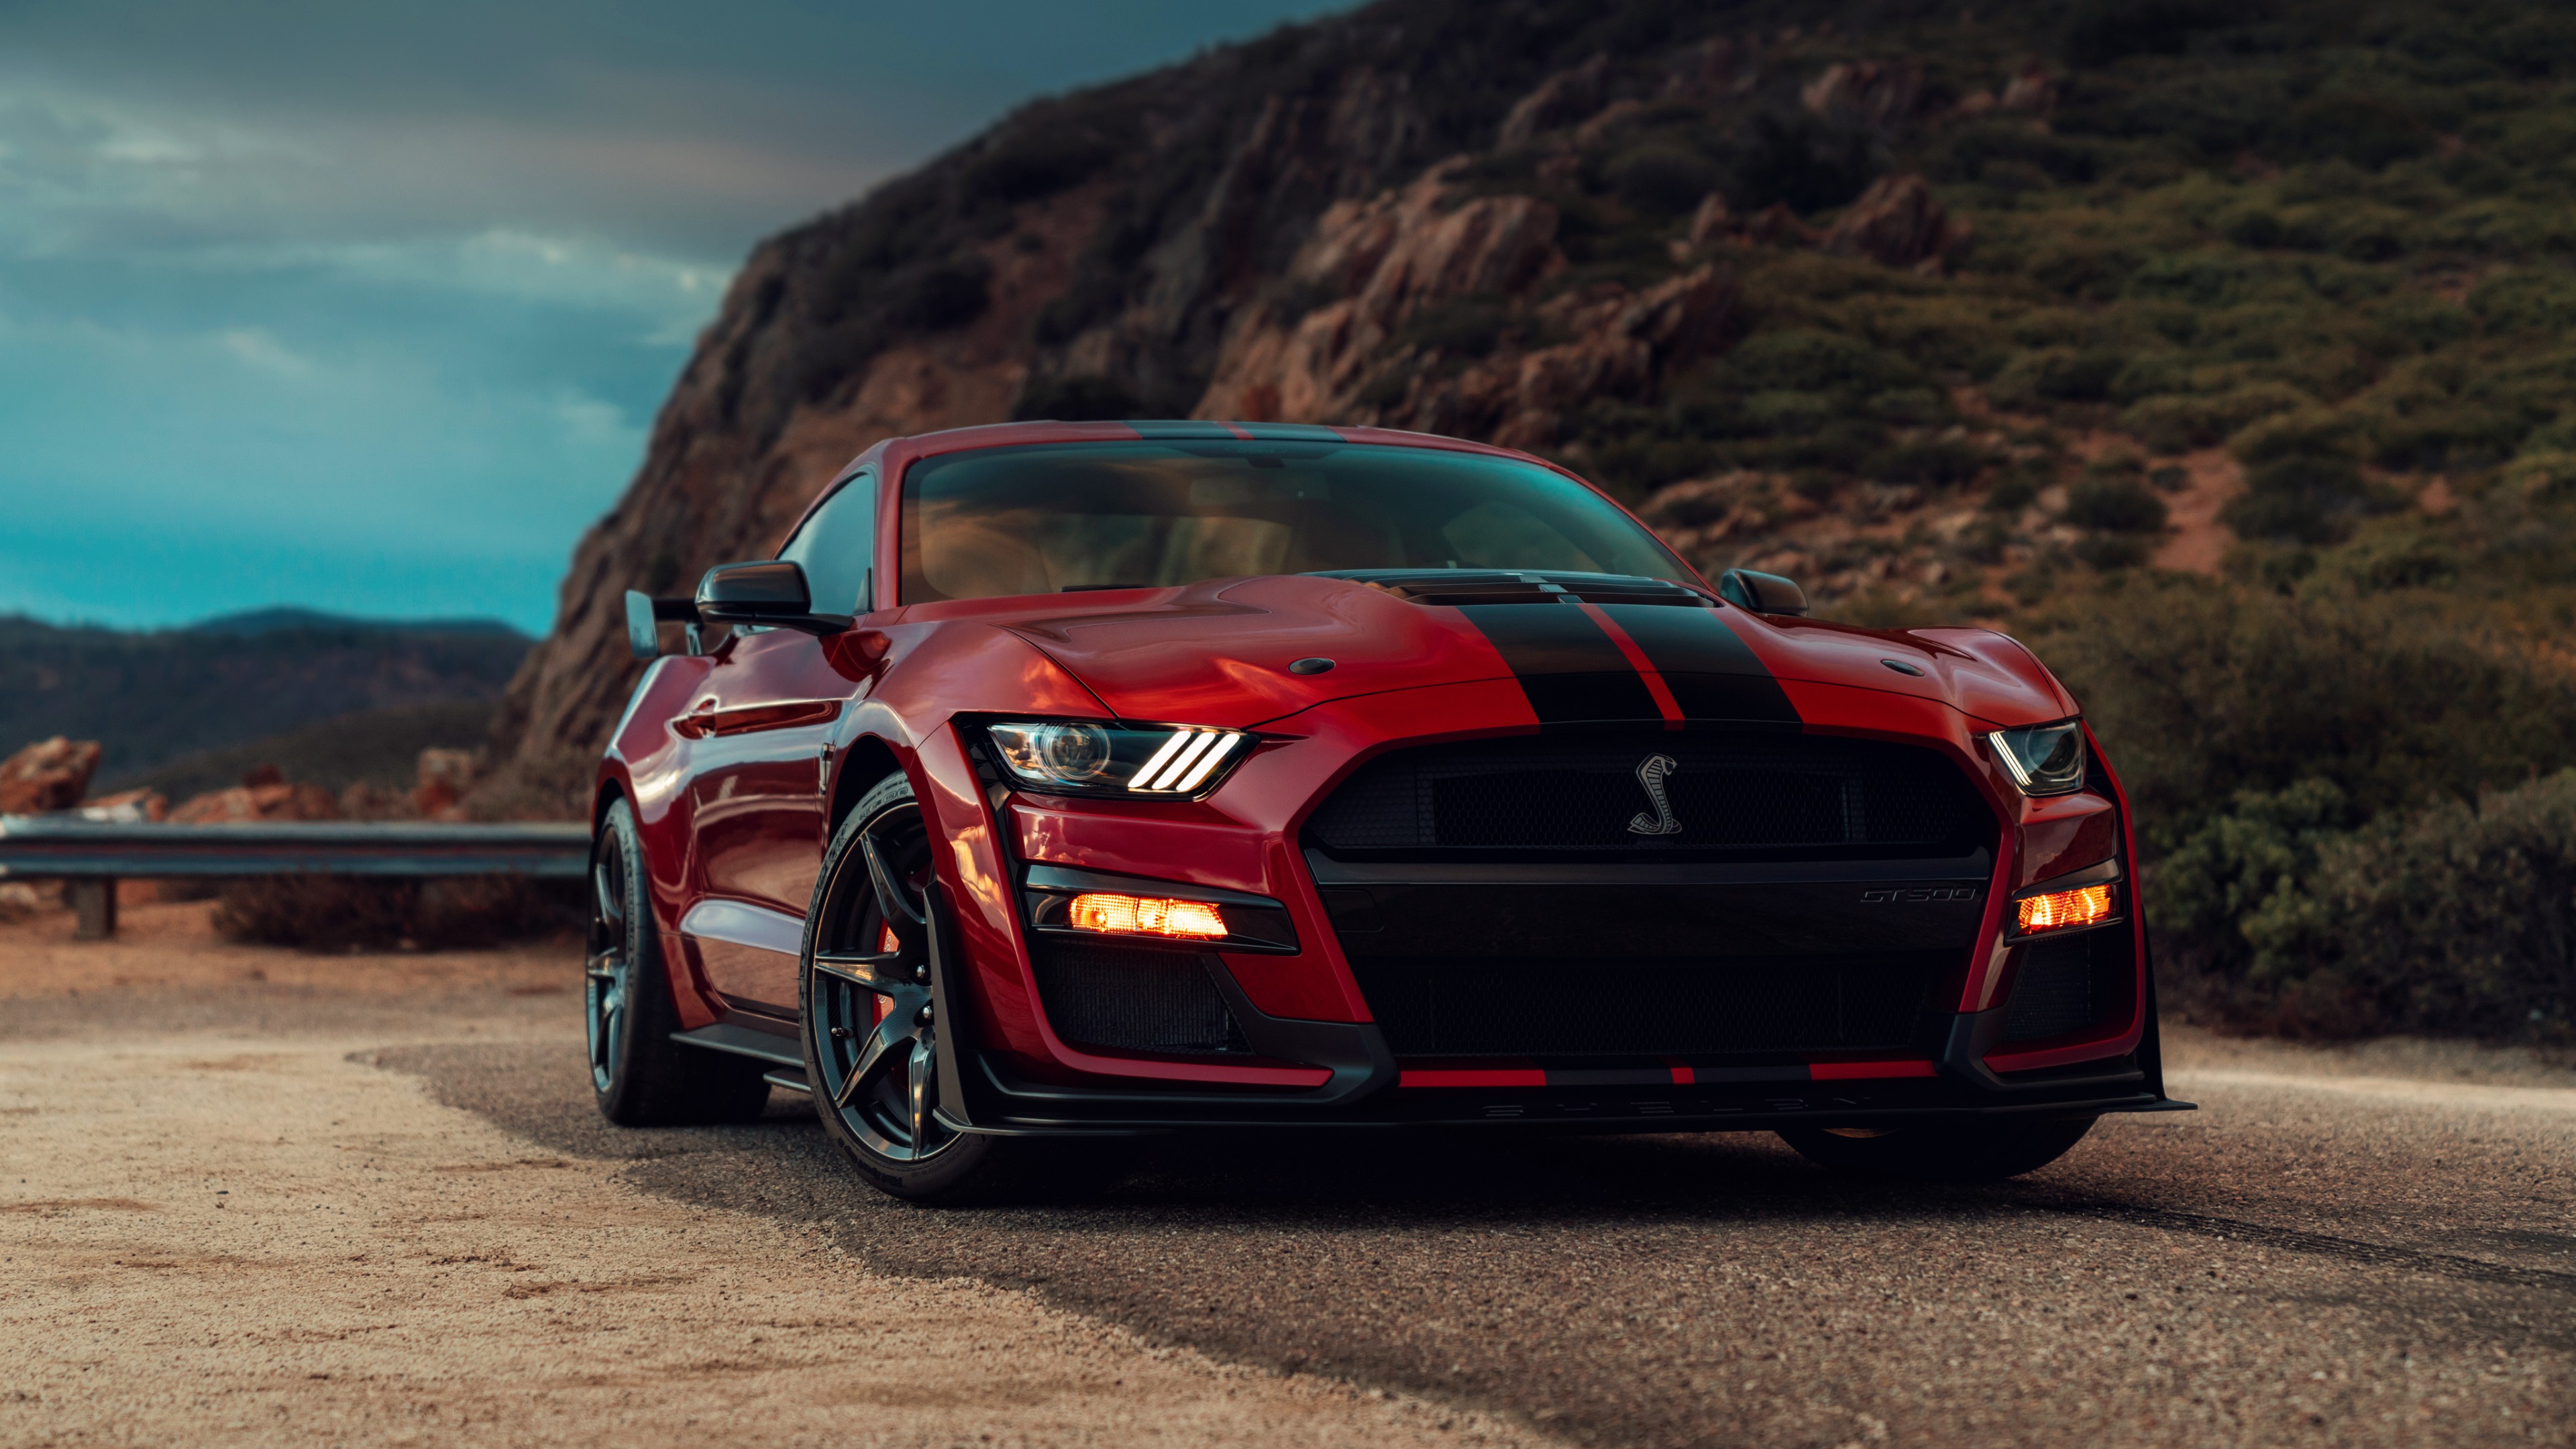 Ford Mustang Shelby Gt500 - HD Wallpaper 